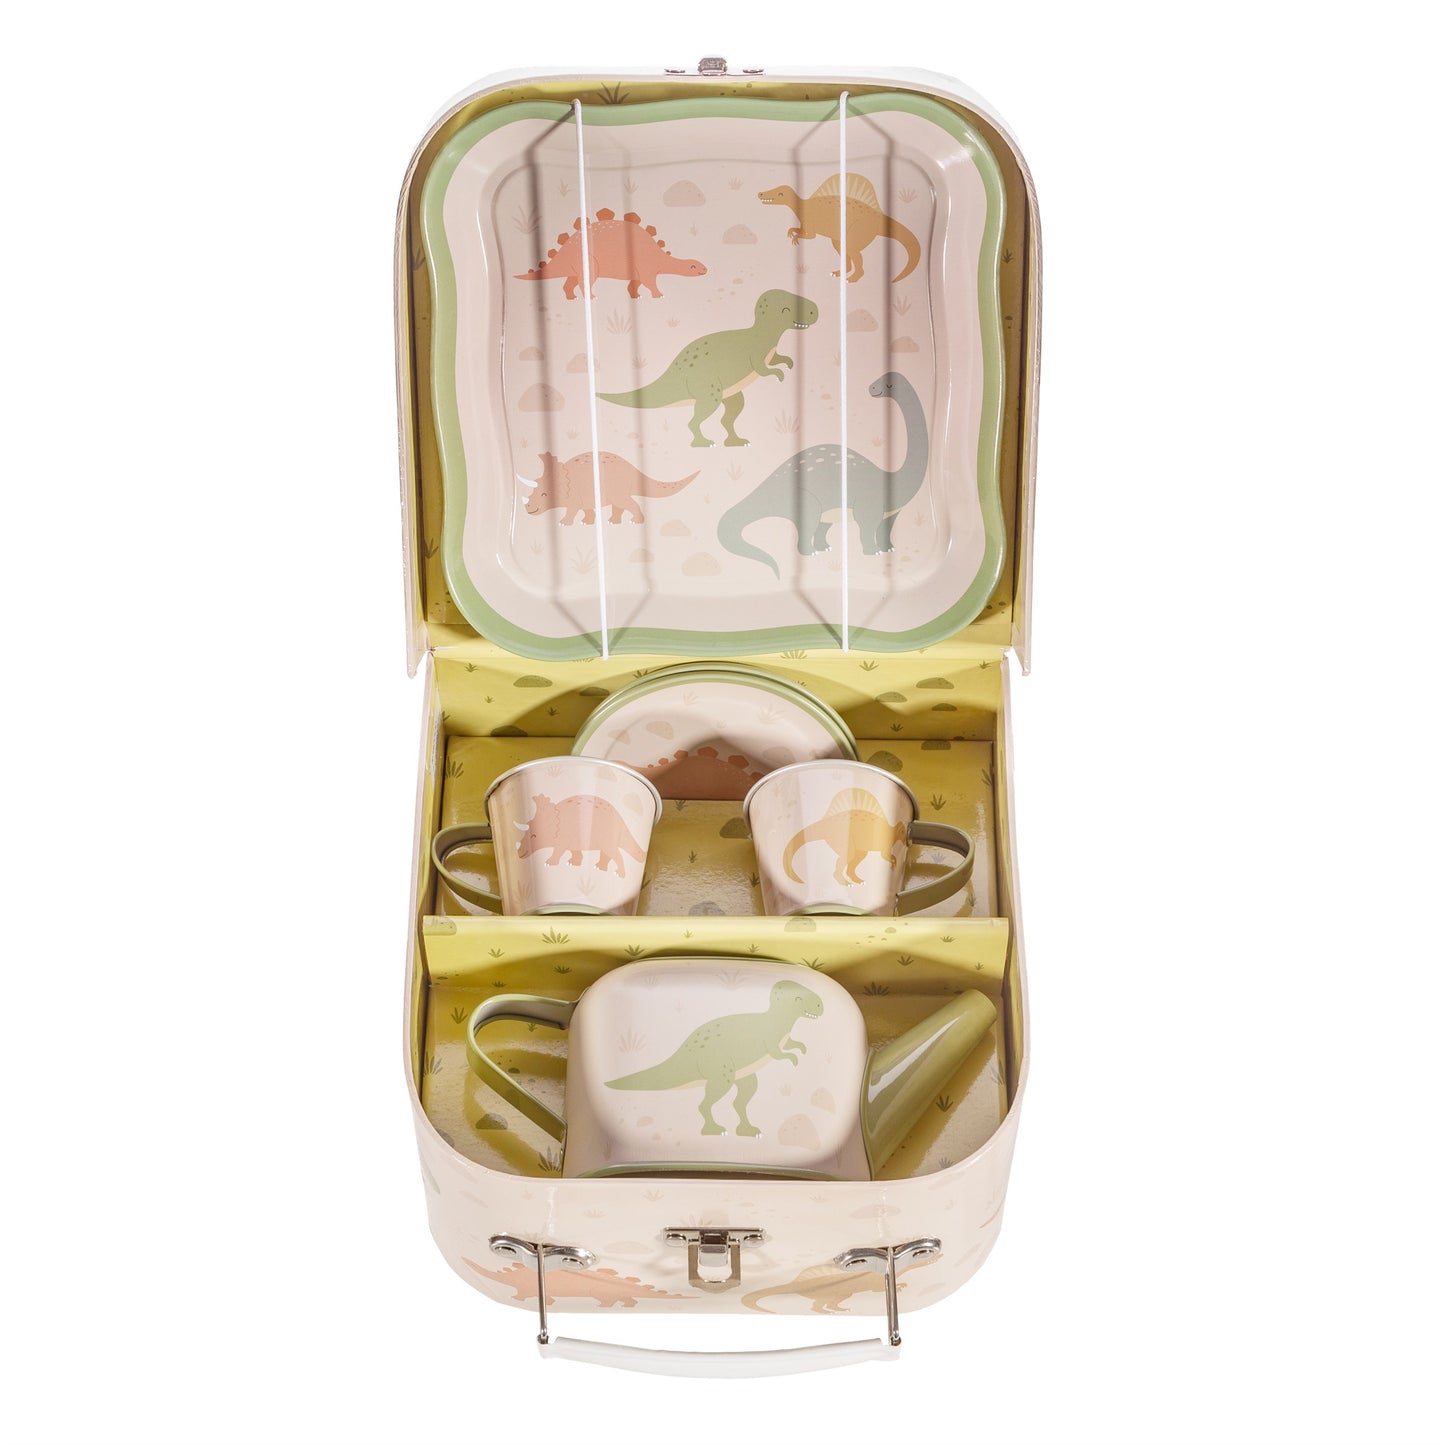 Desert Dino Kids' Tea for Two Set by Sass and Belle